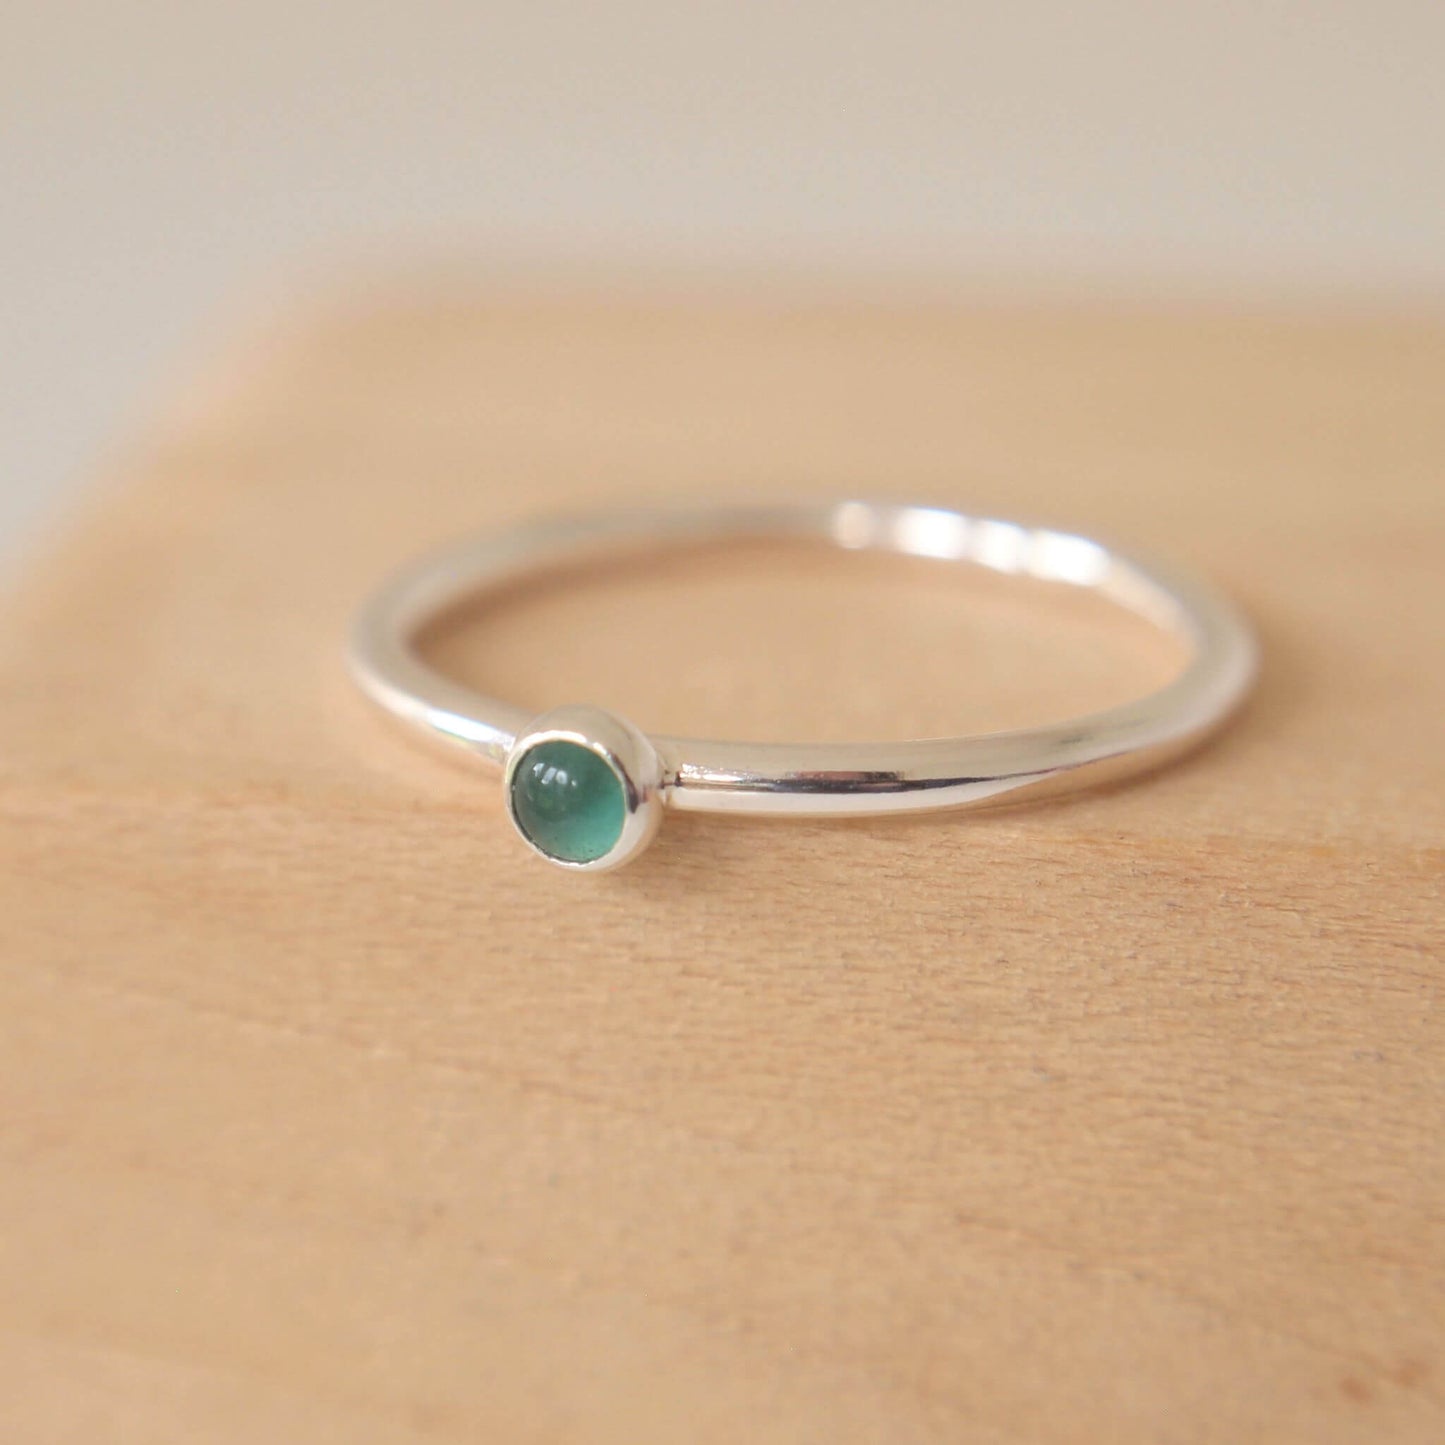 Green Agate and Sterling Silver Birthstone RIng for May. The ring is simple in style on a plain fully round band with a small round Green Agate in the centre. The ring is handmade to your size by maram jewellery in Scotland